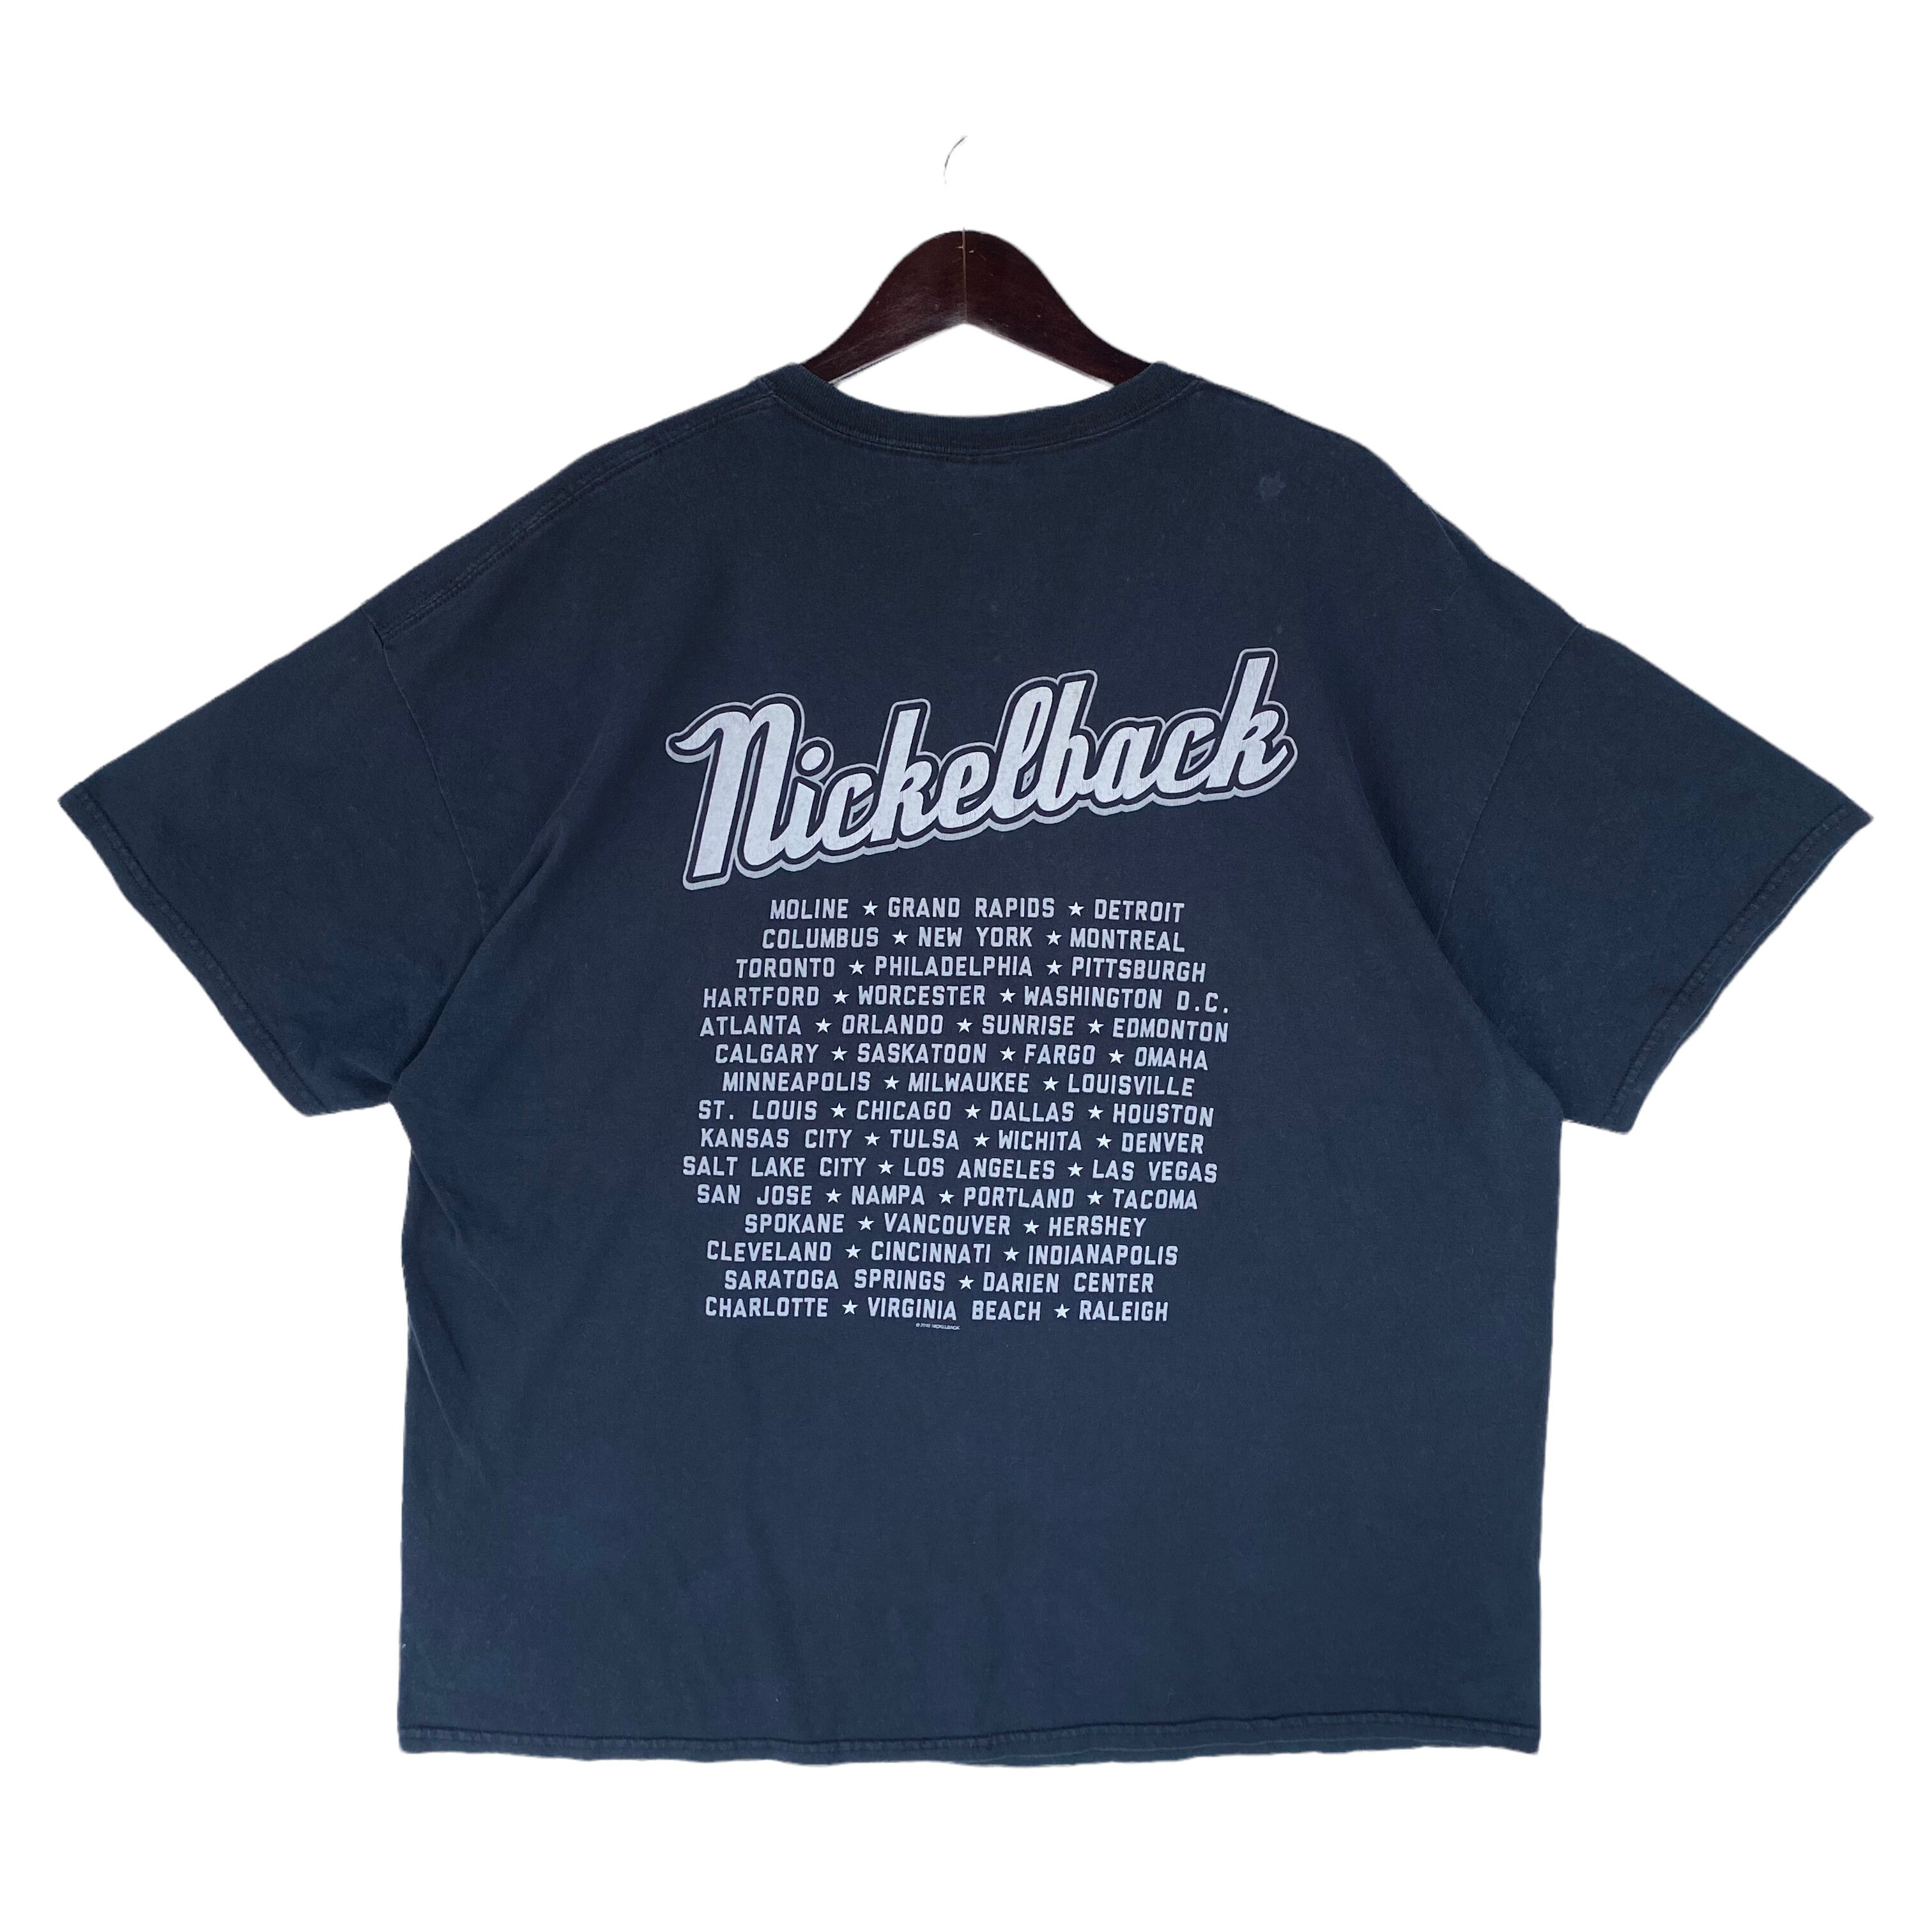 Tour Tee NICKELBACK hard rock band here and now tour 2012 shirt Size US XXL / EU 58 / 5 - 2 Preview